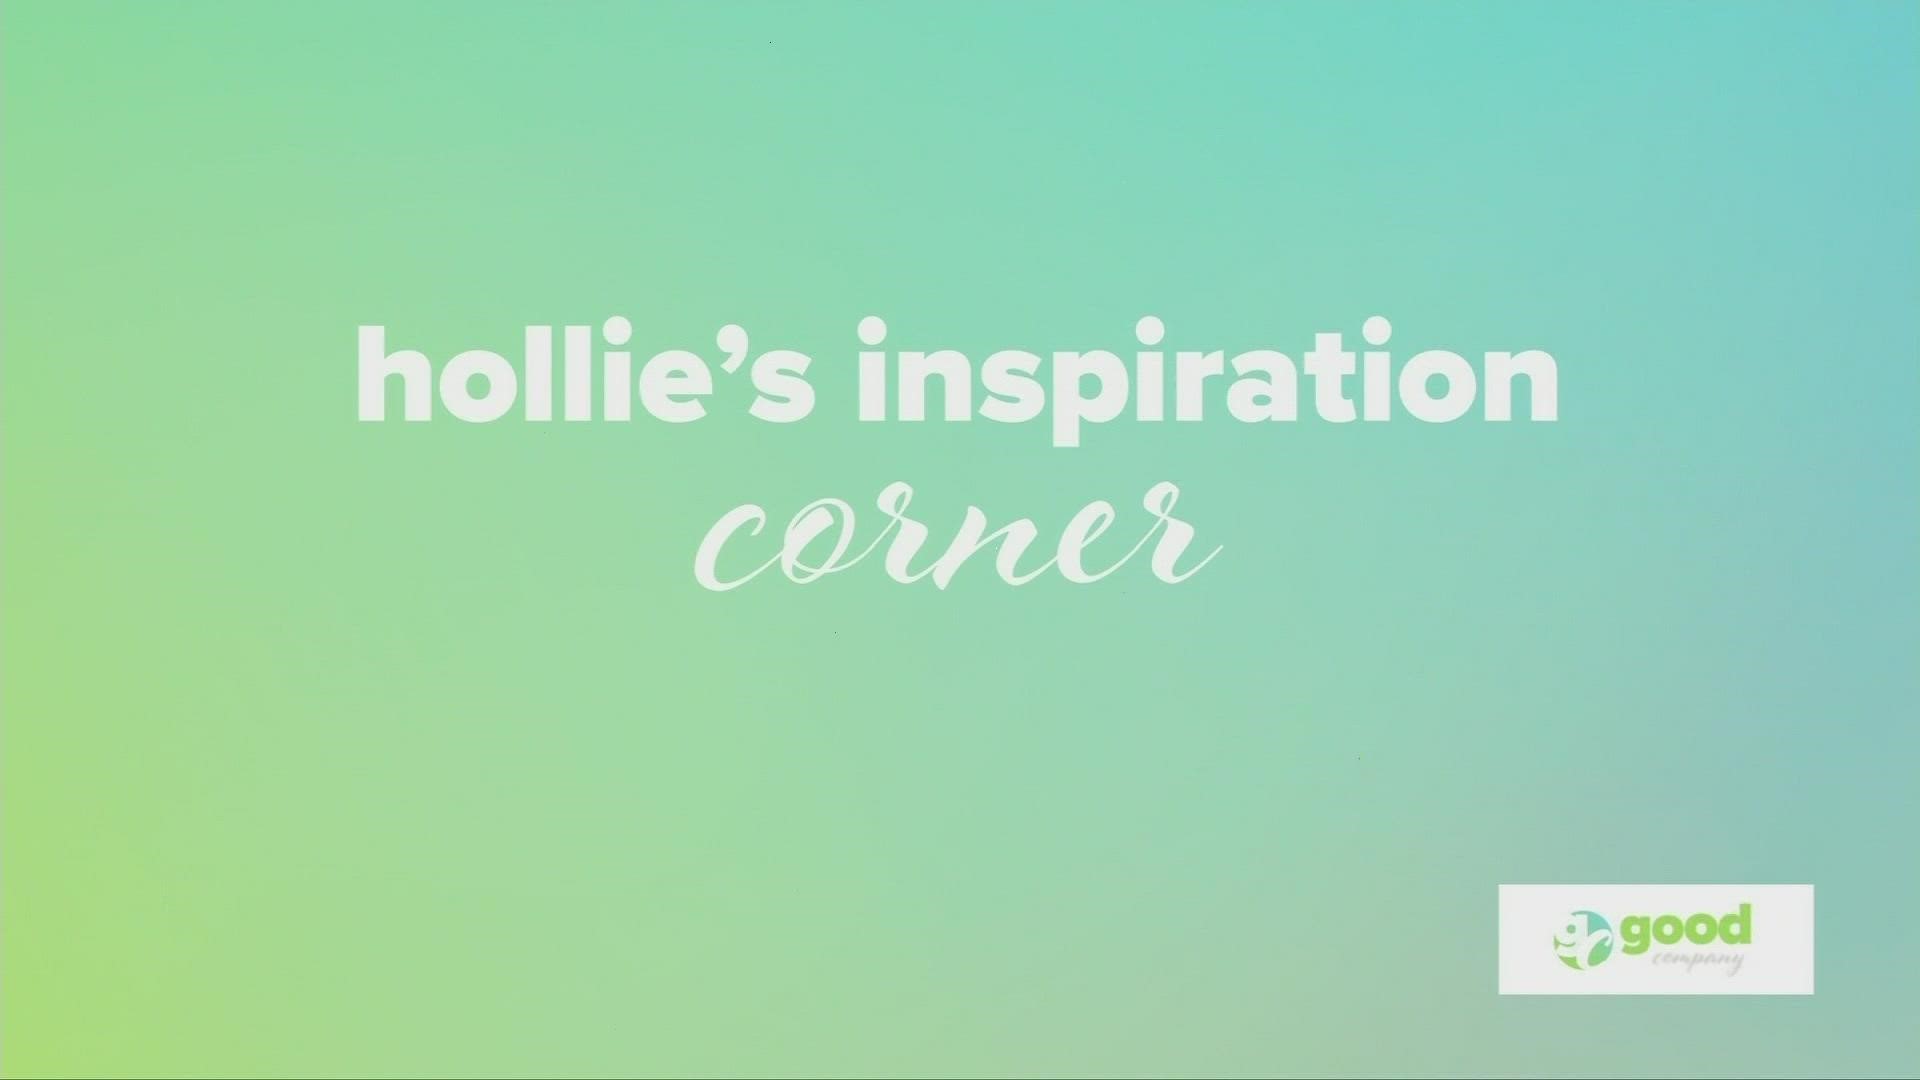 Hollie talks about how choosing to surround yourself with positive people can help impact your daily life.